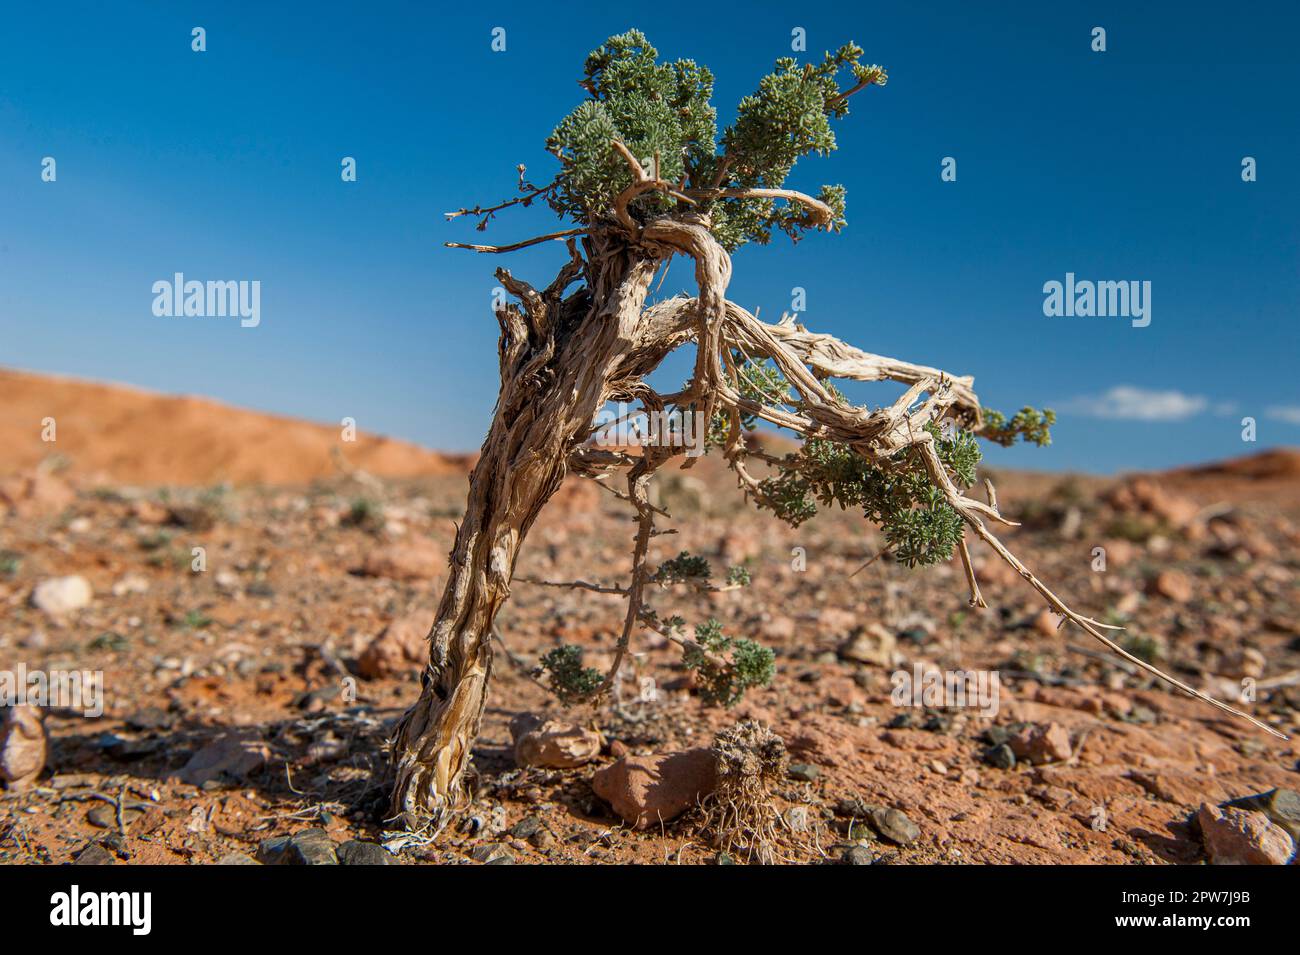 A small saxaul tree, a scrubby tree best adapted to the dry desert climate of the Gobi Desert, Mongolia, Central Asia Stock Photo